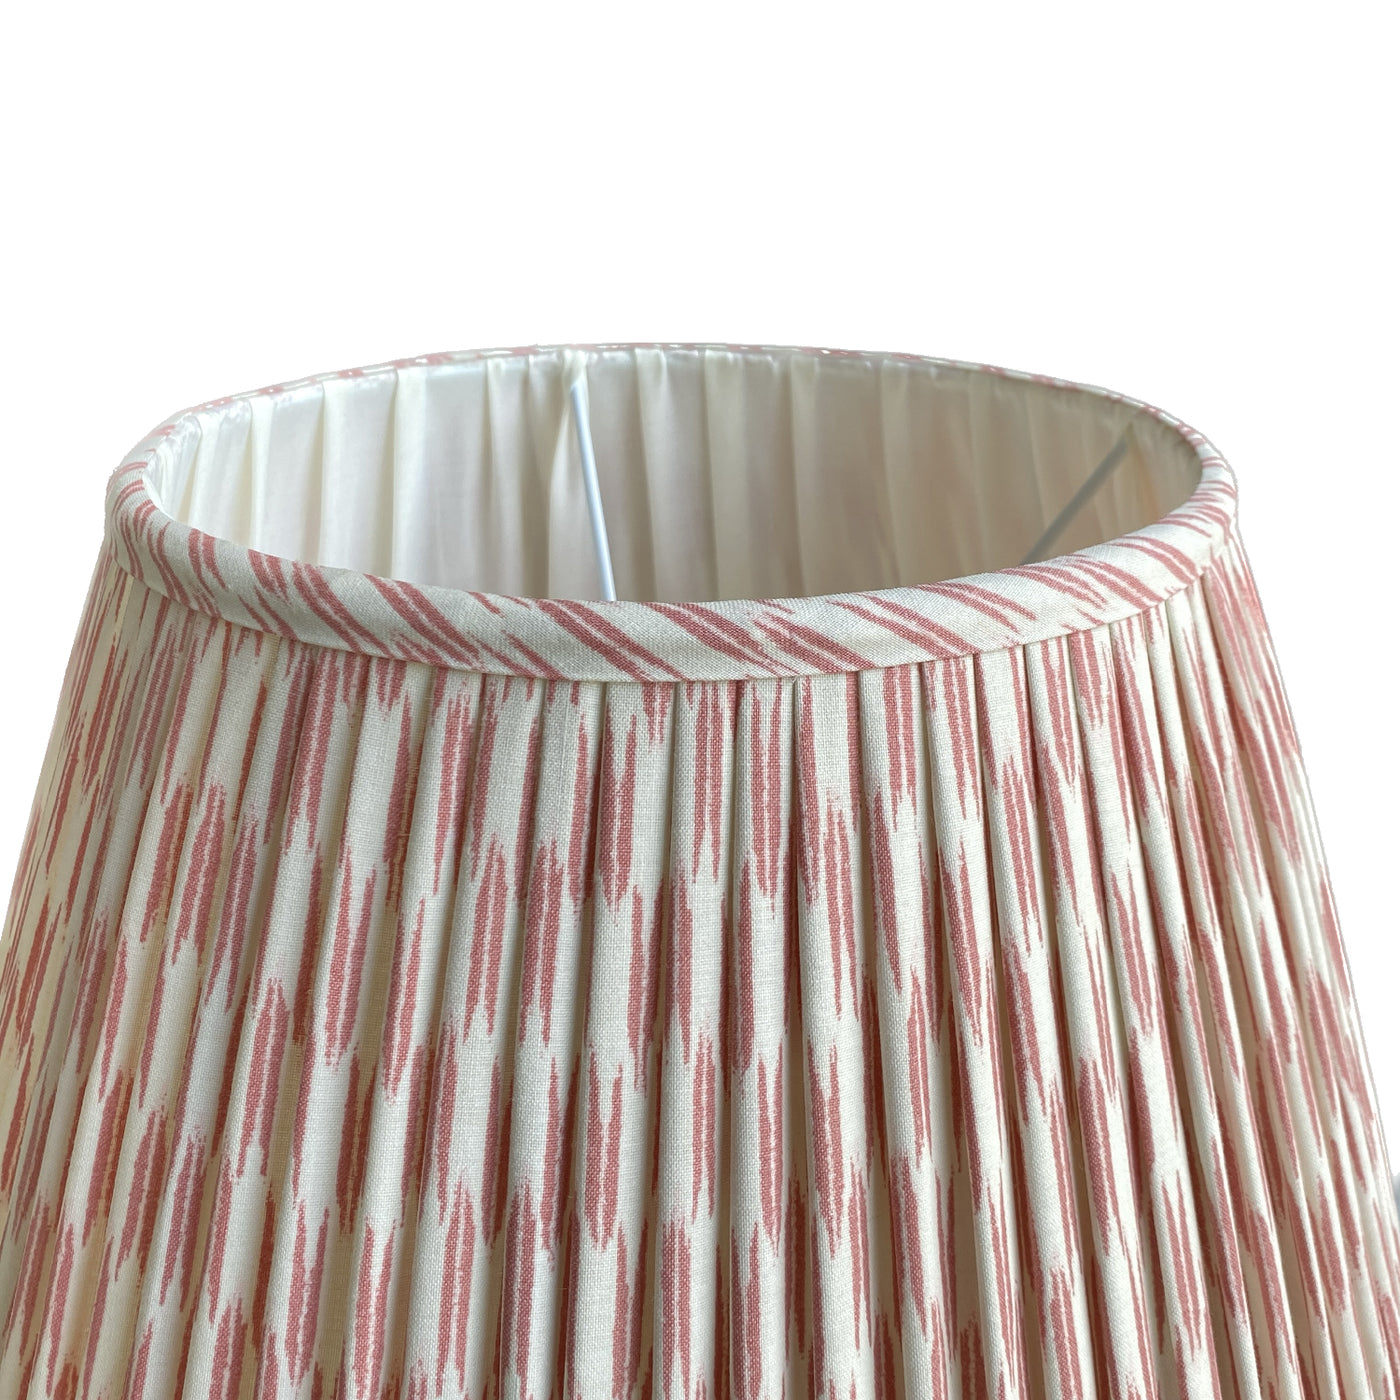 Ian Sanderson pink and white lampshade